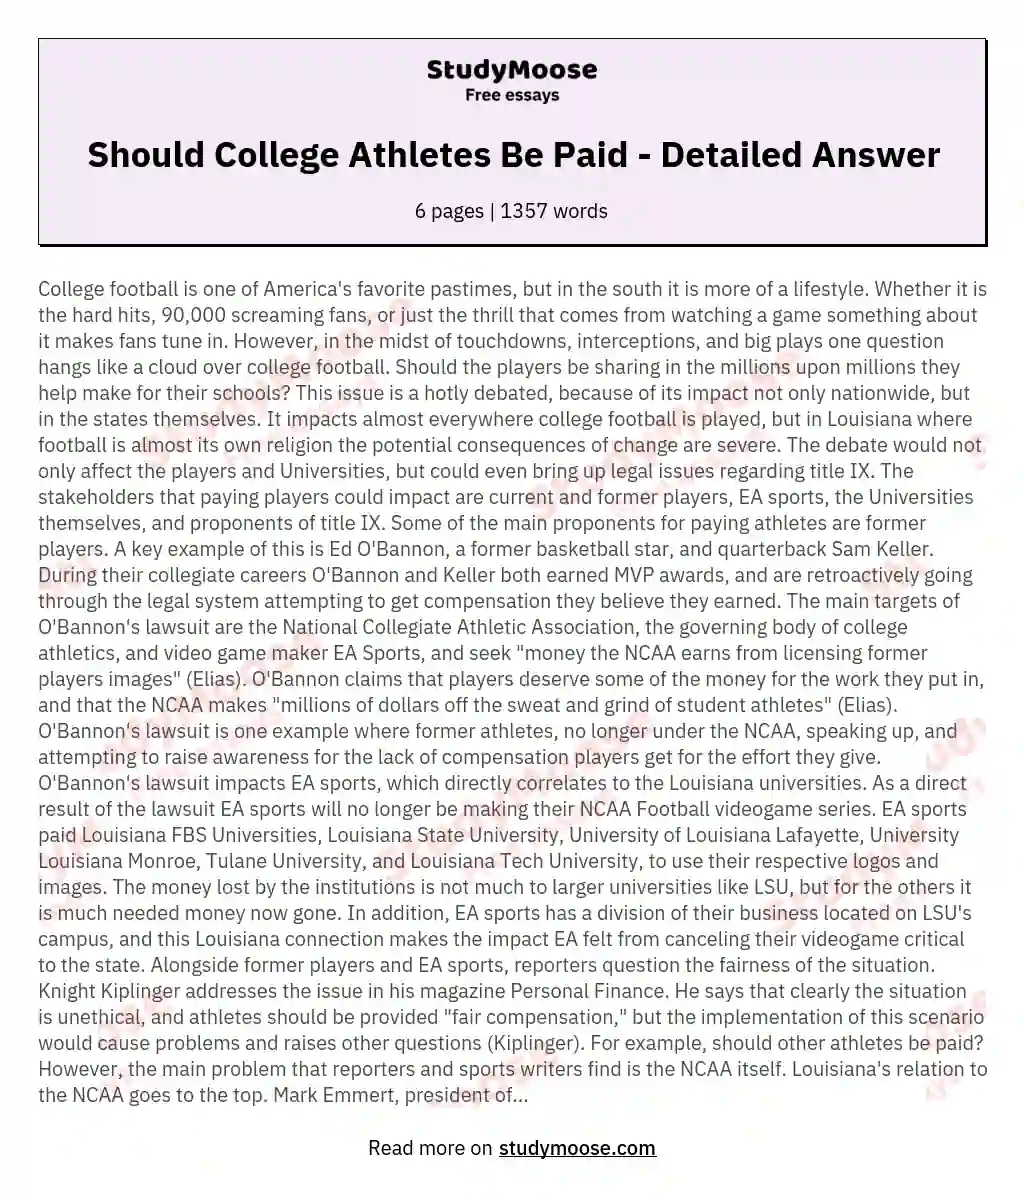 Should College Athletes Be Paid - Detailed Answer essay